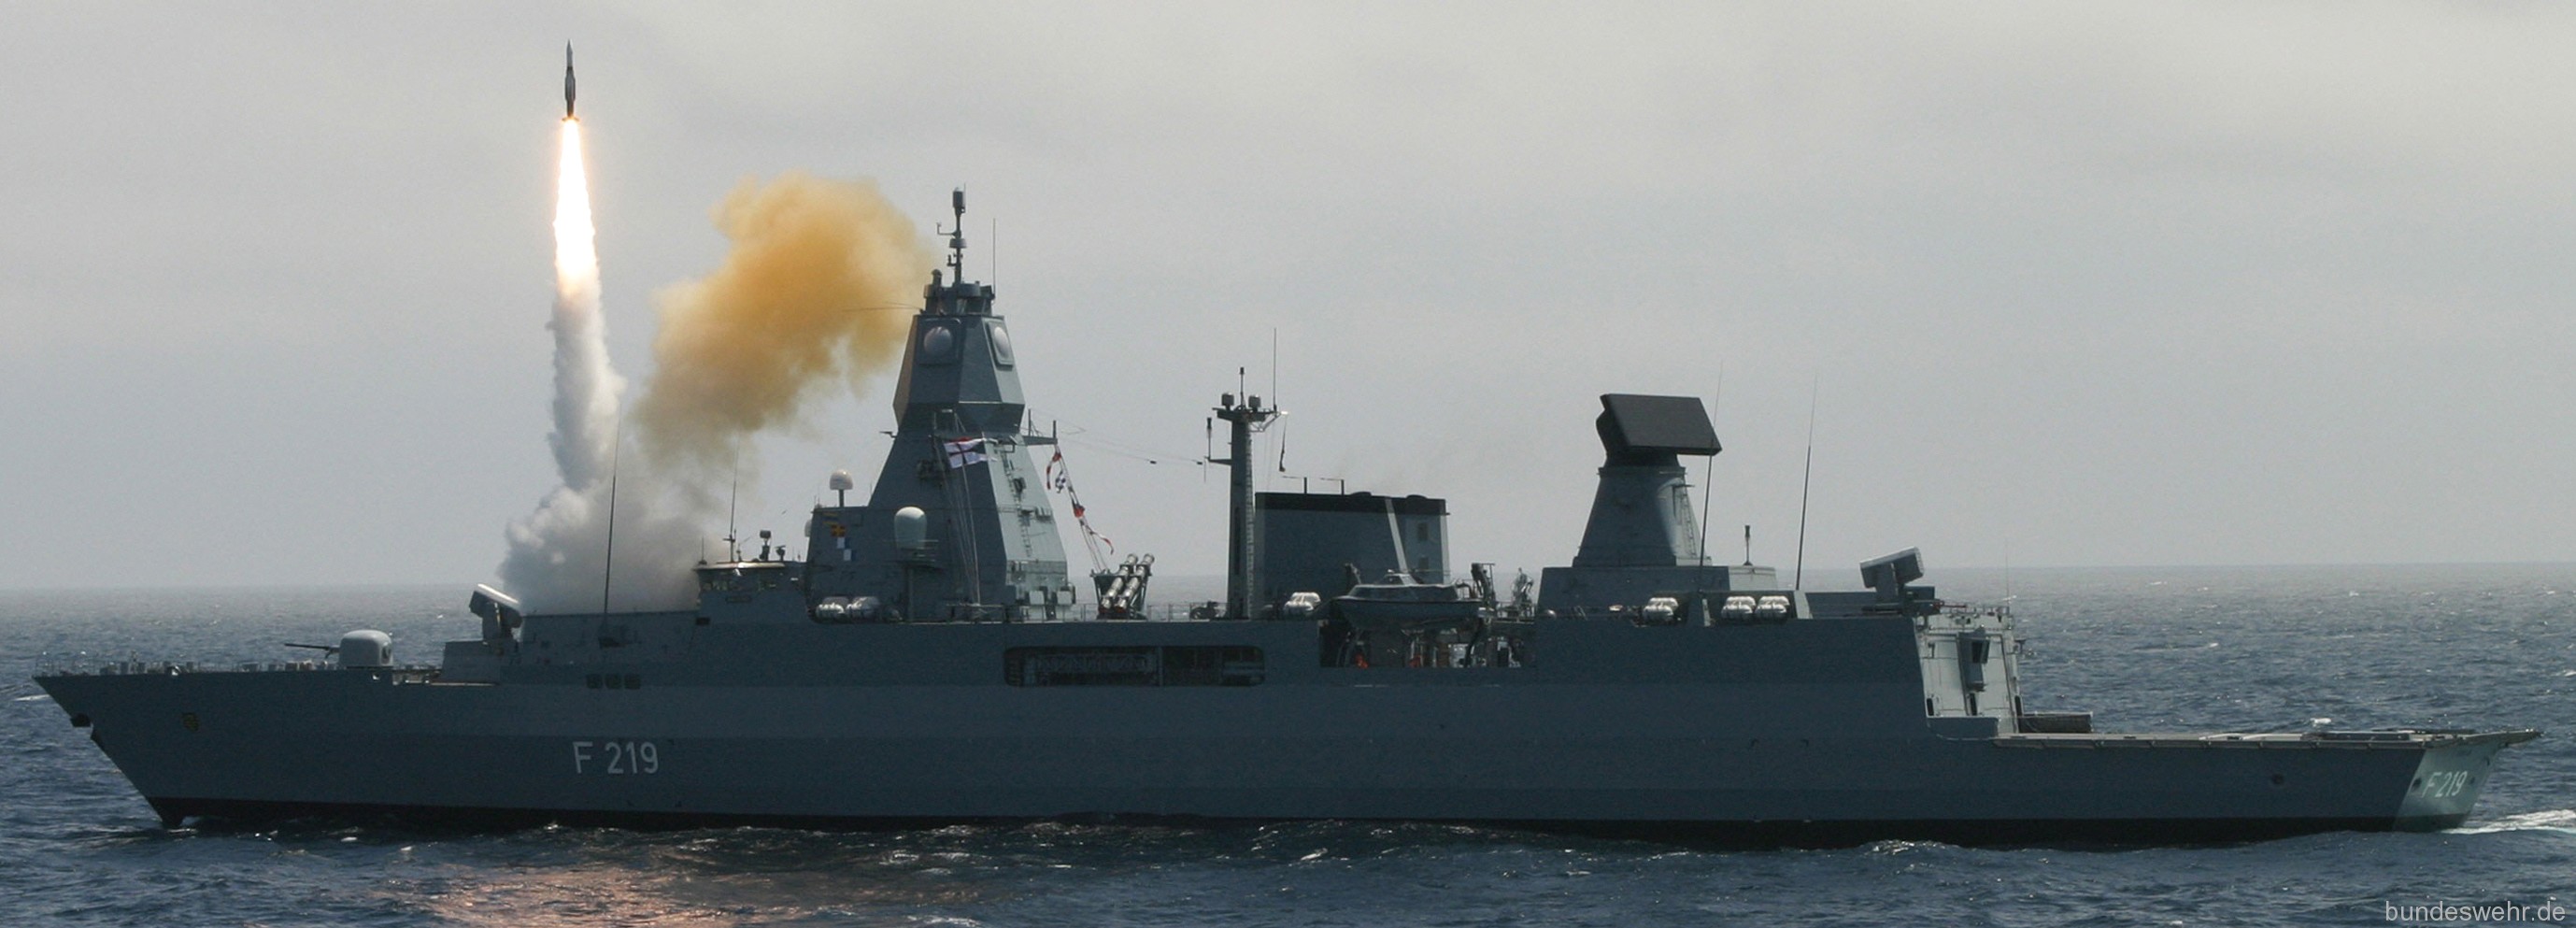 f-219 fgs sachsen type 124 class guided missile frigate ffg german navy 07